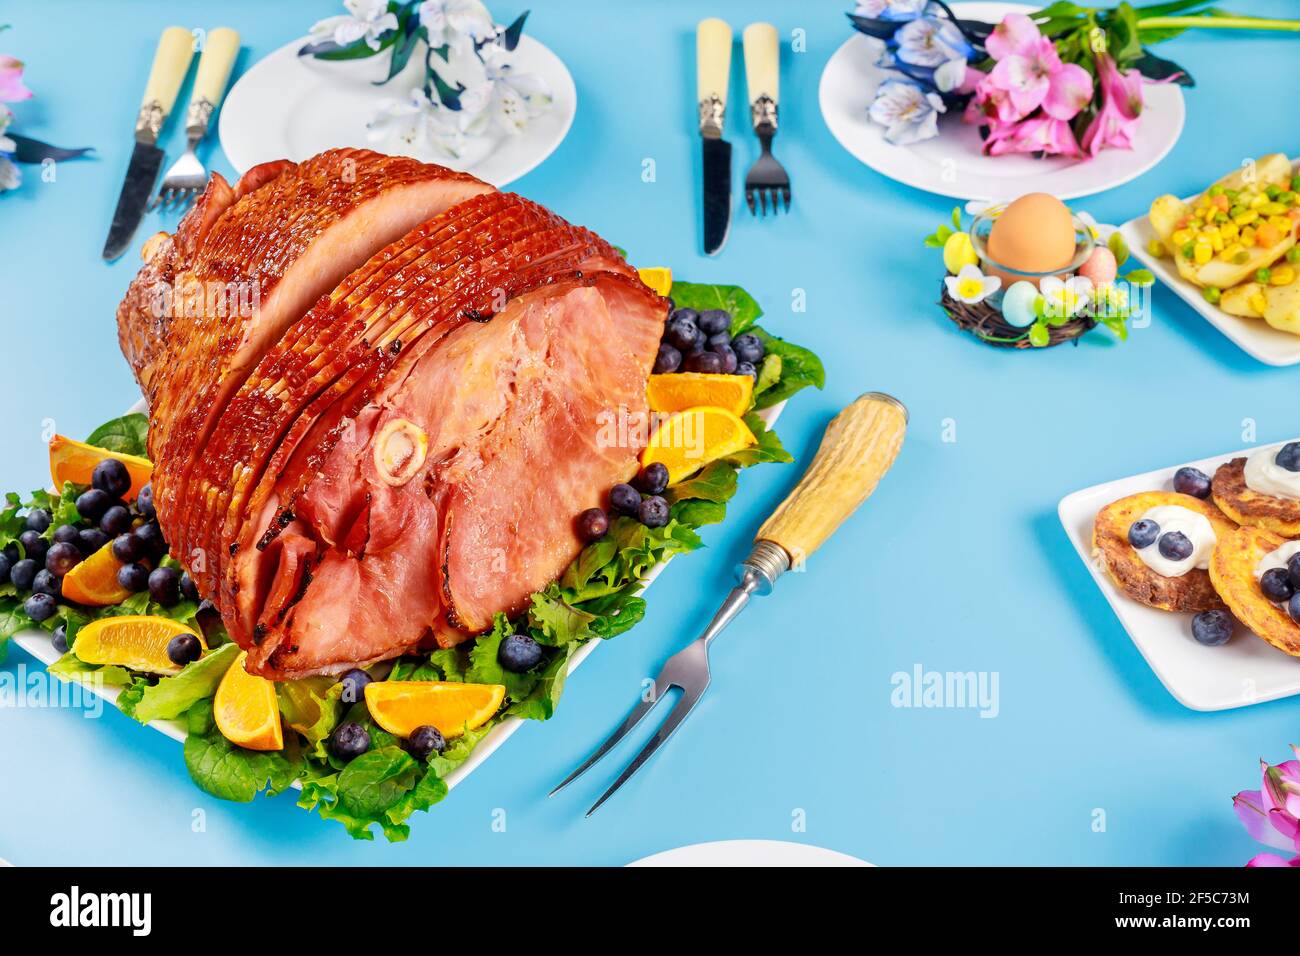 Pre sliced honey ham on party table for Easter. Stock Photo